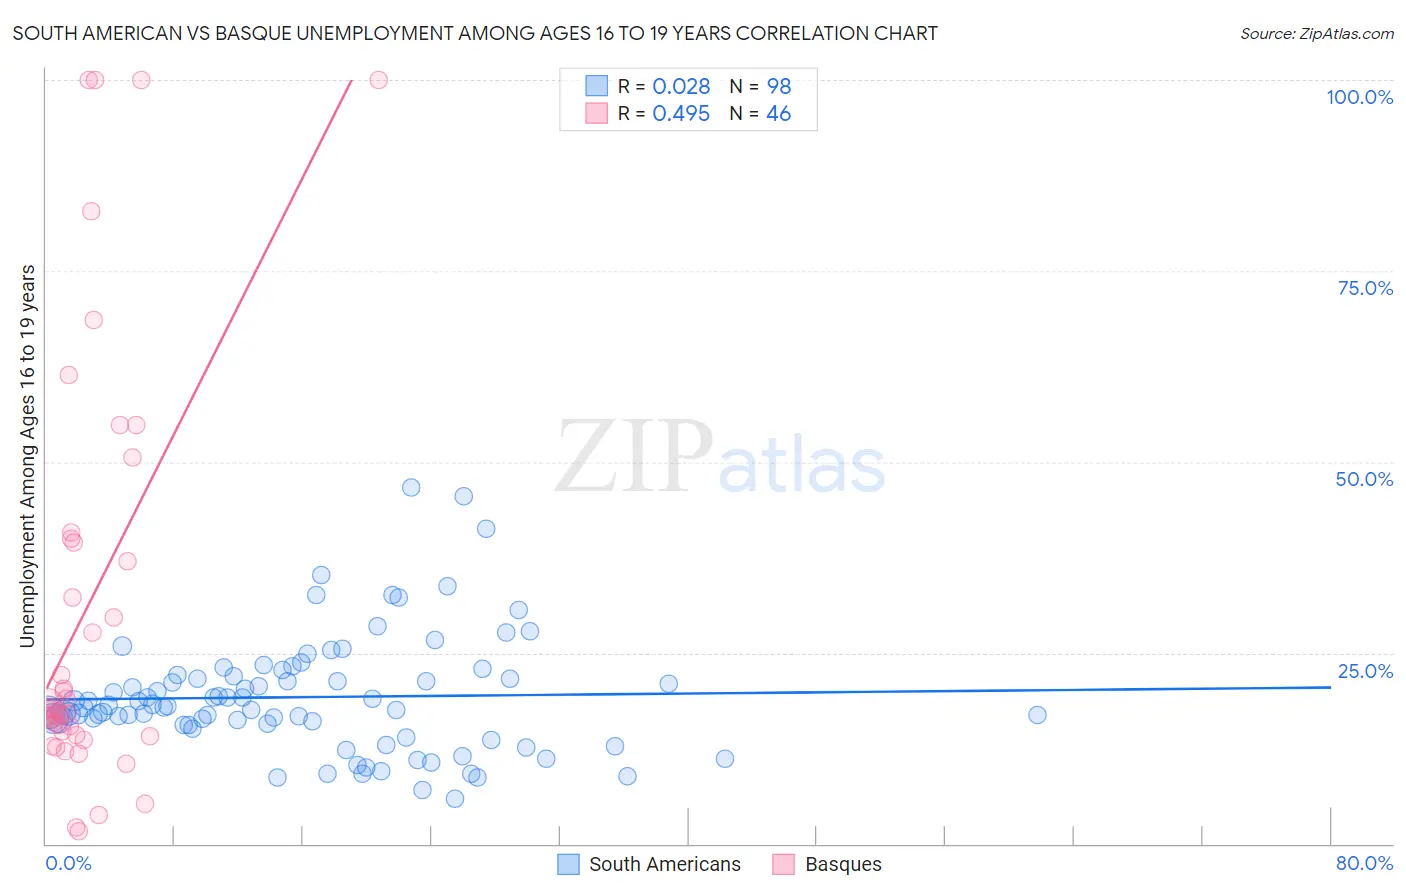 South American vs Basque Unemployment Among Ages 16 to 19 years